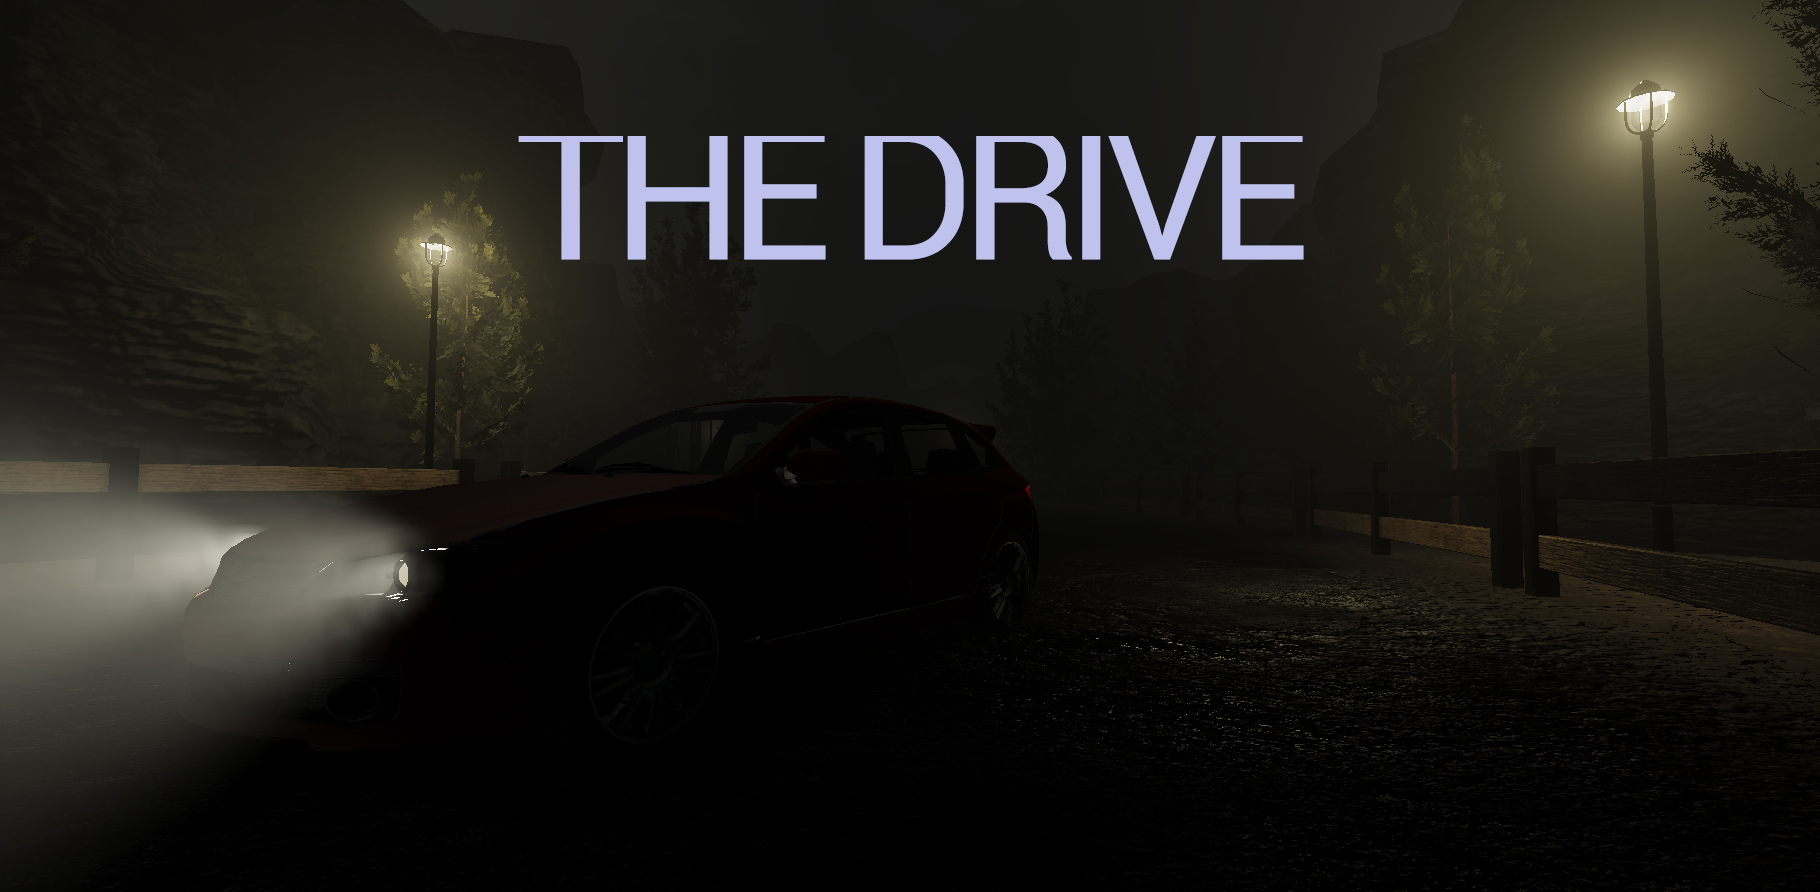 The Drive